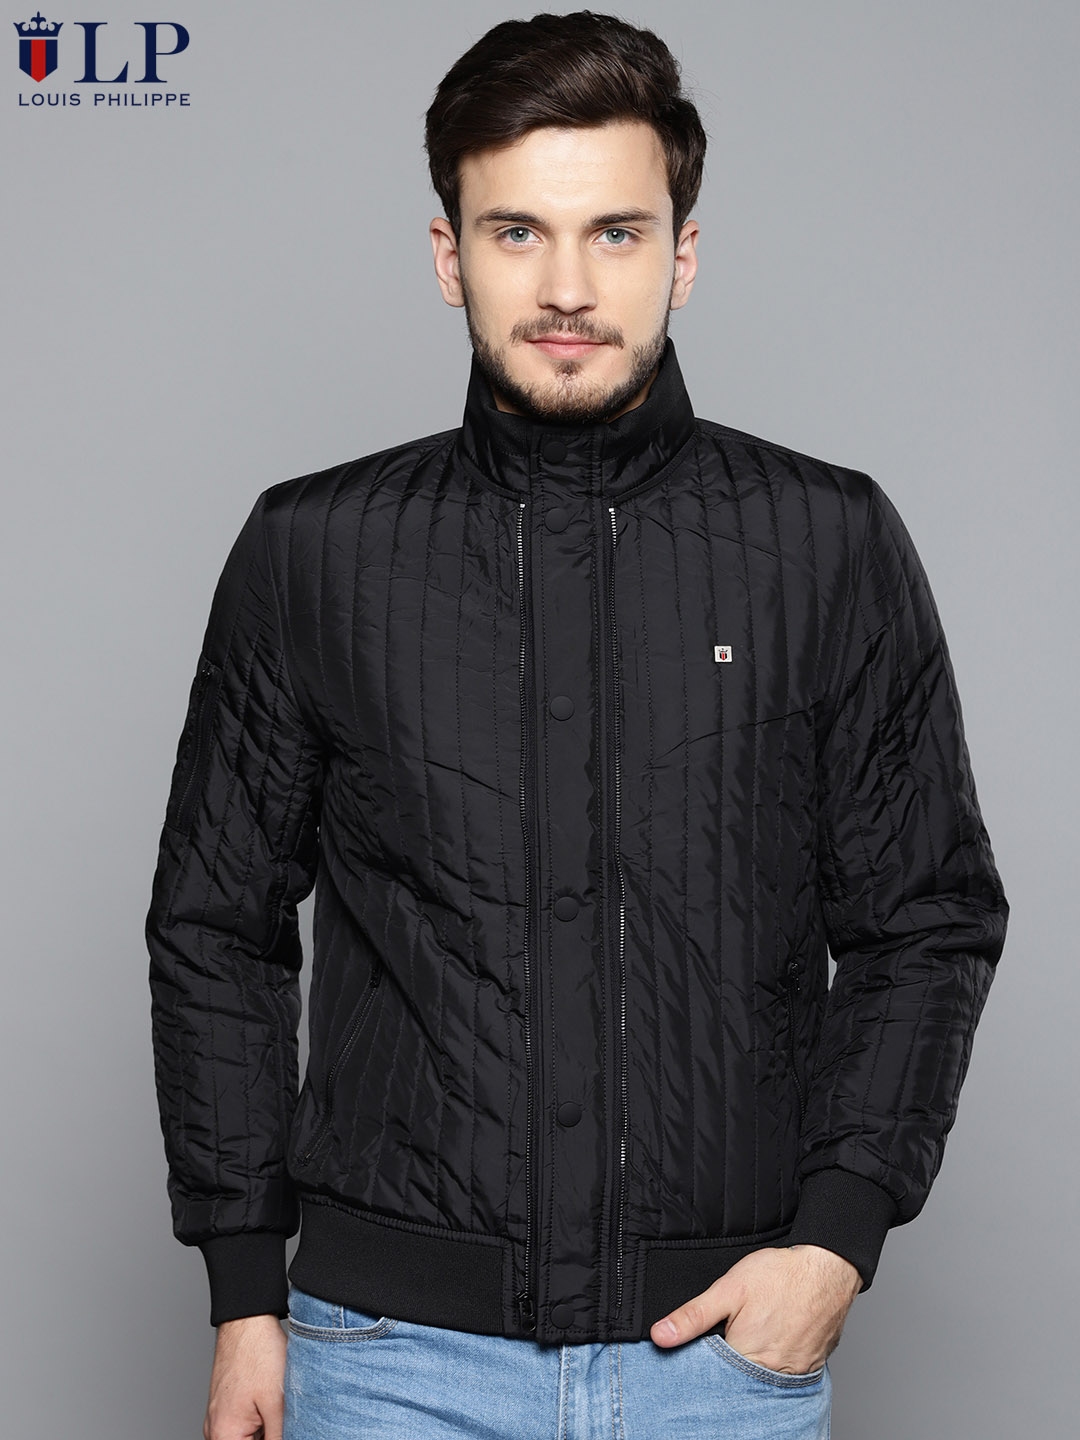 ONE PK - Get 2 in 1 convertible jackets at Flat 50% off!